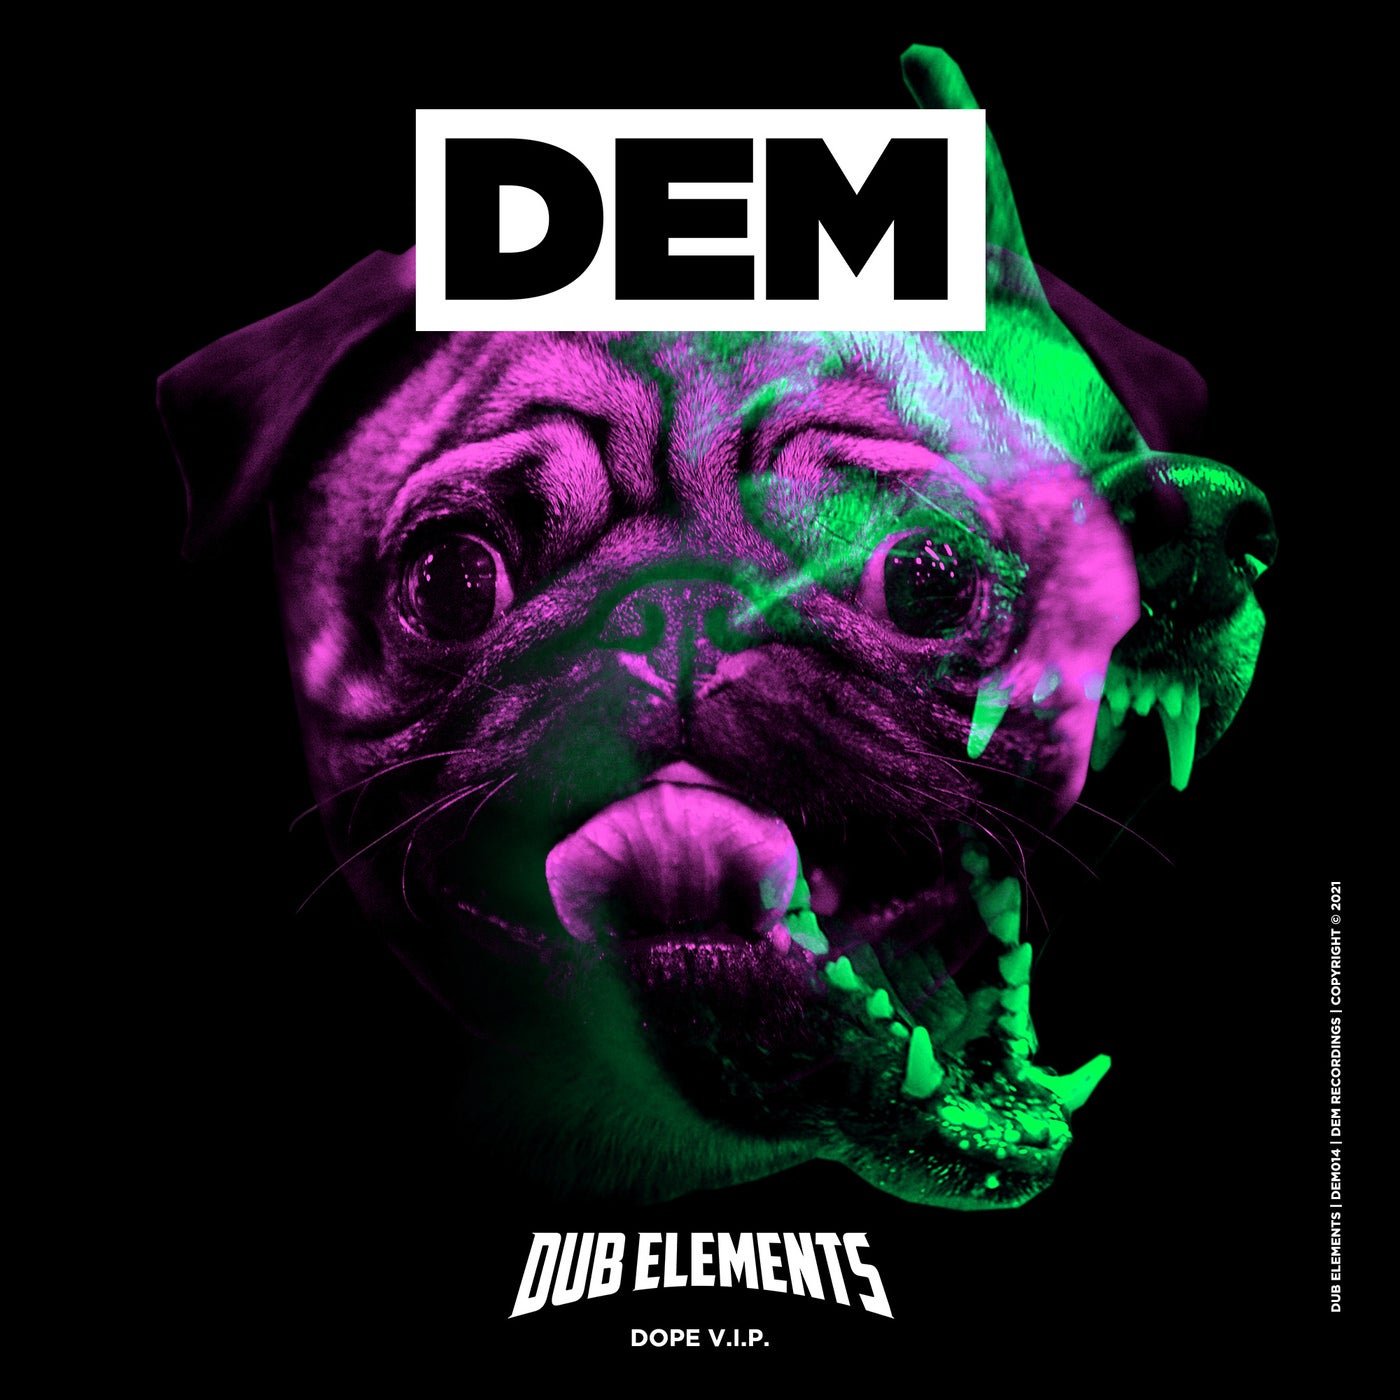 Dope (VIP) by Dub Elements on Beatport